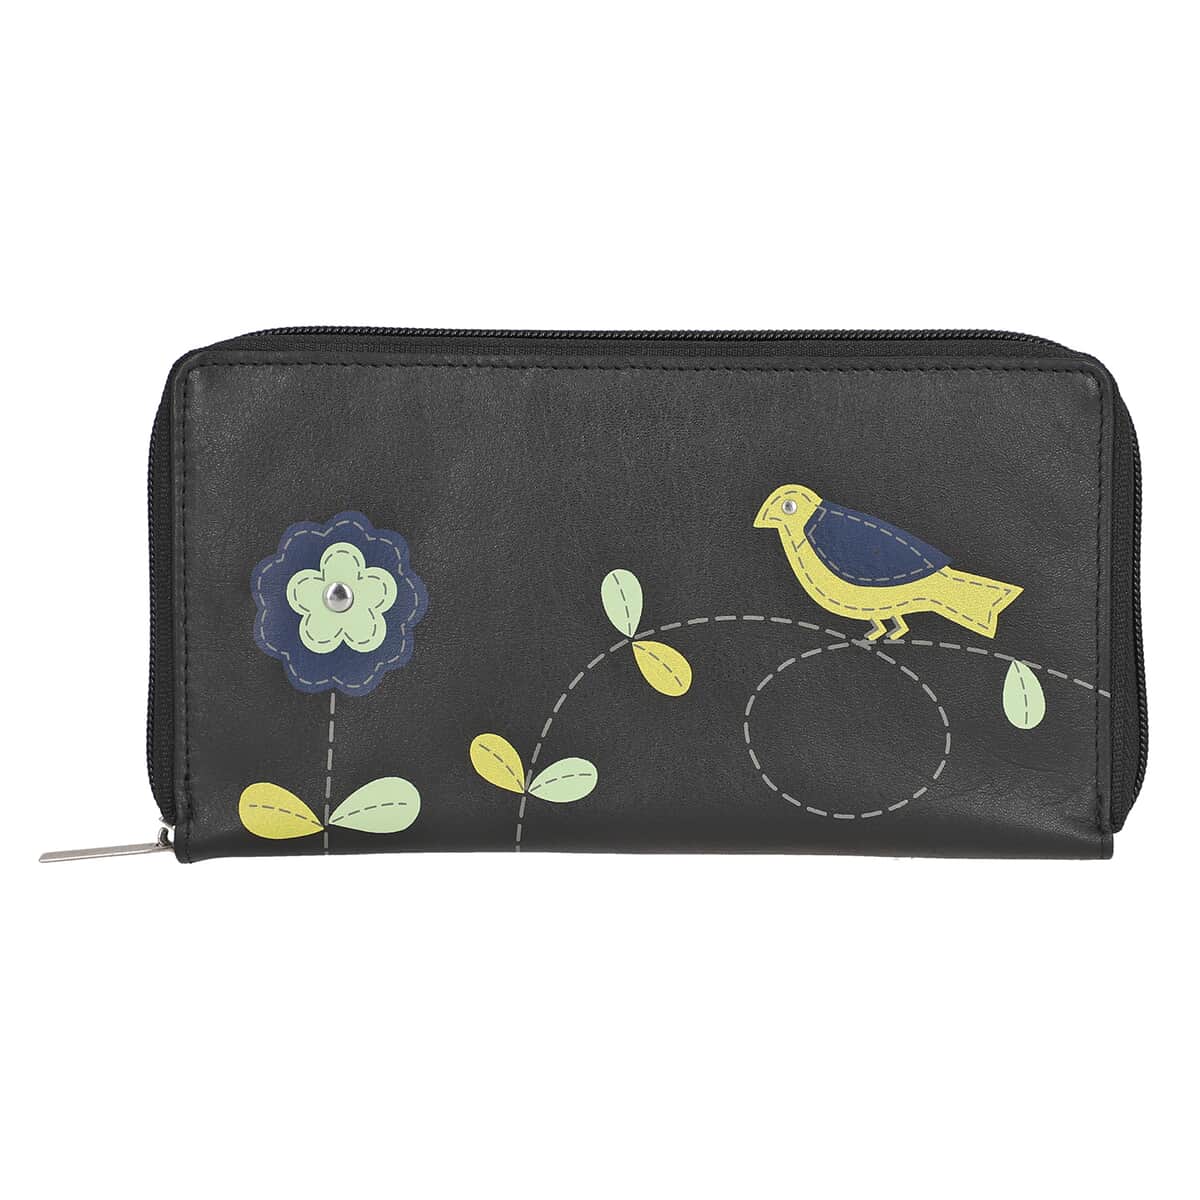 Union Code Black Color Floral Pattern 100% Genuine Leather RFID Protected Applique Women's Wallet image number 0